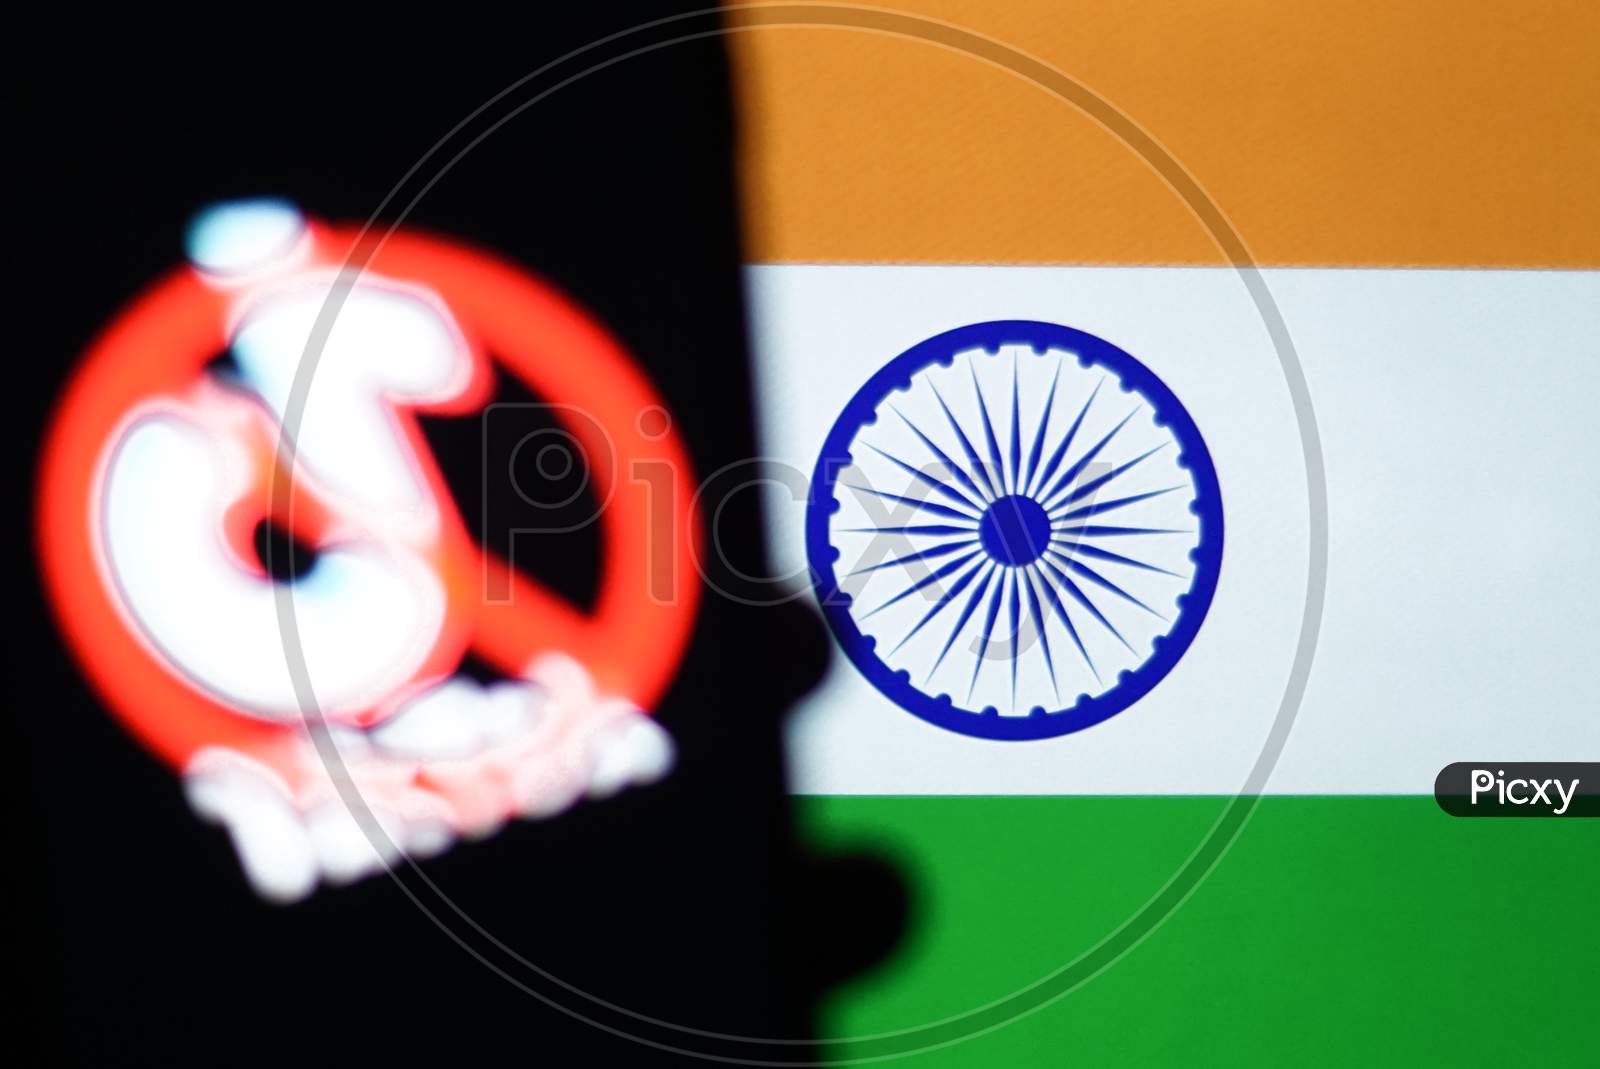 Tiktok Banned in India Application Logo On A Mobile Screen and a finger about to touch with Indian Flag in the background